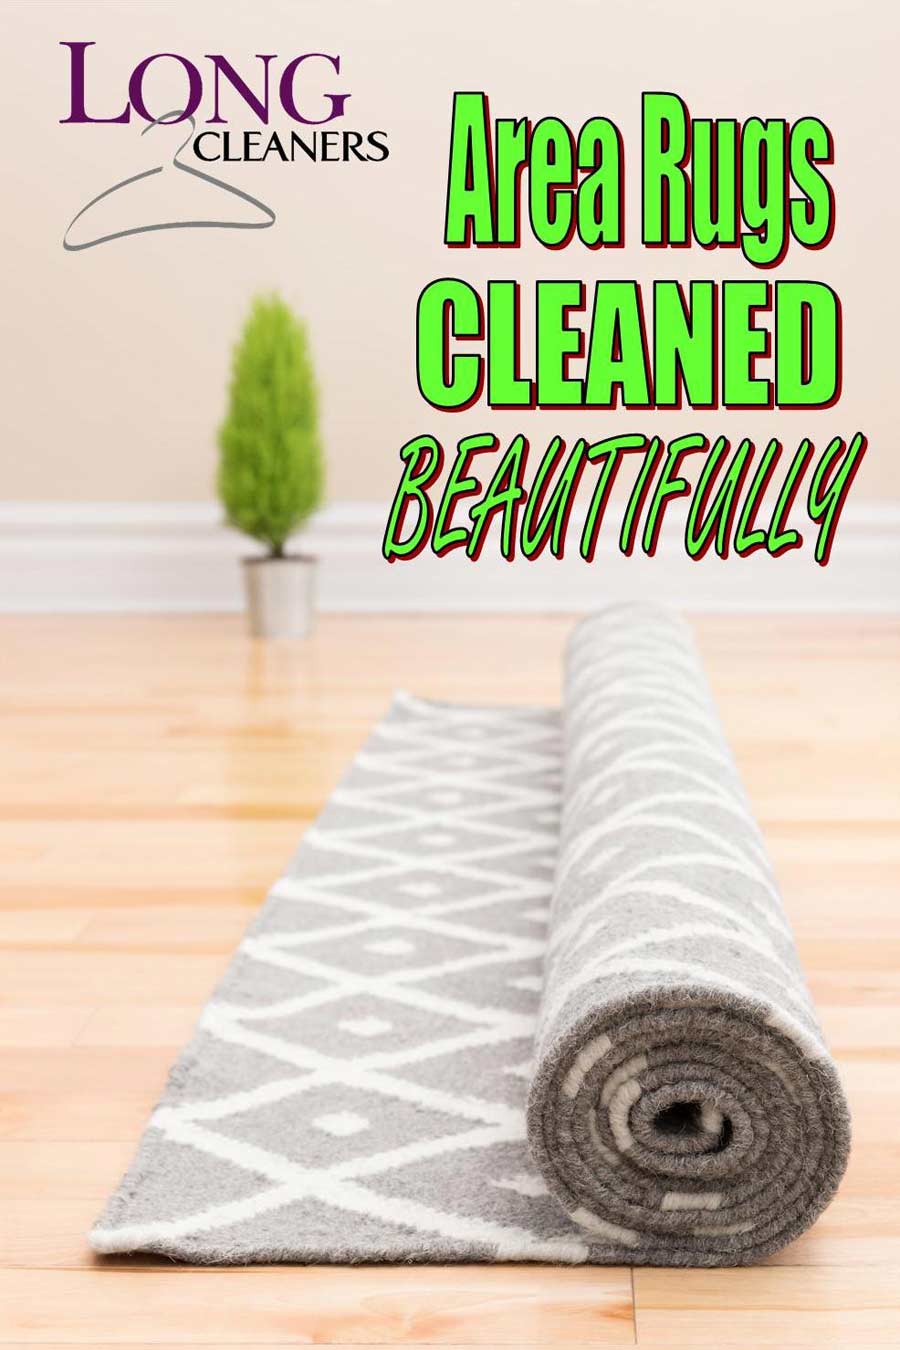 Area Rug Cleaning Services - Long Cleaners - Dayton Ohio - 937-866-4341